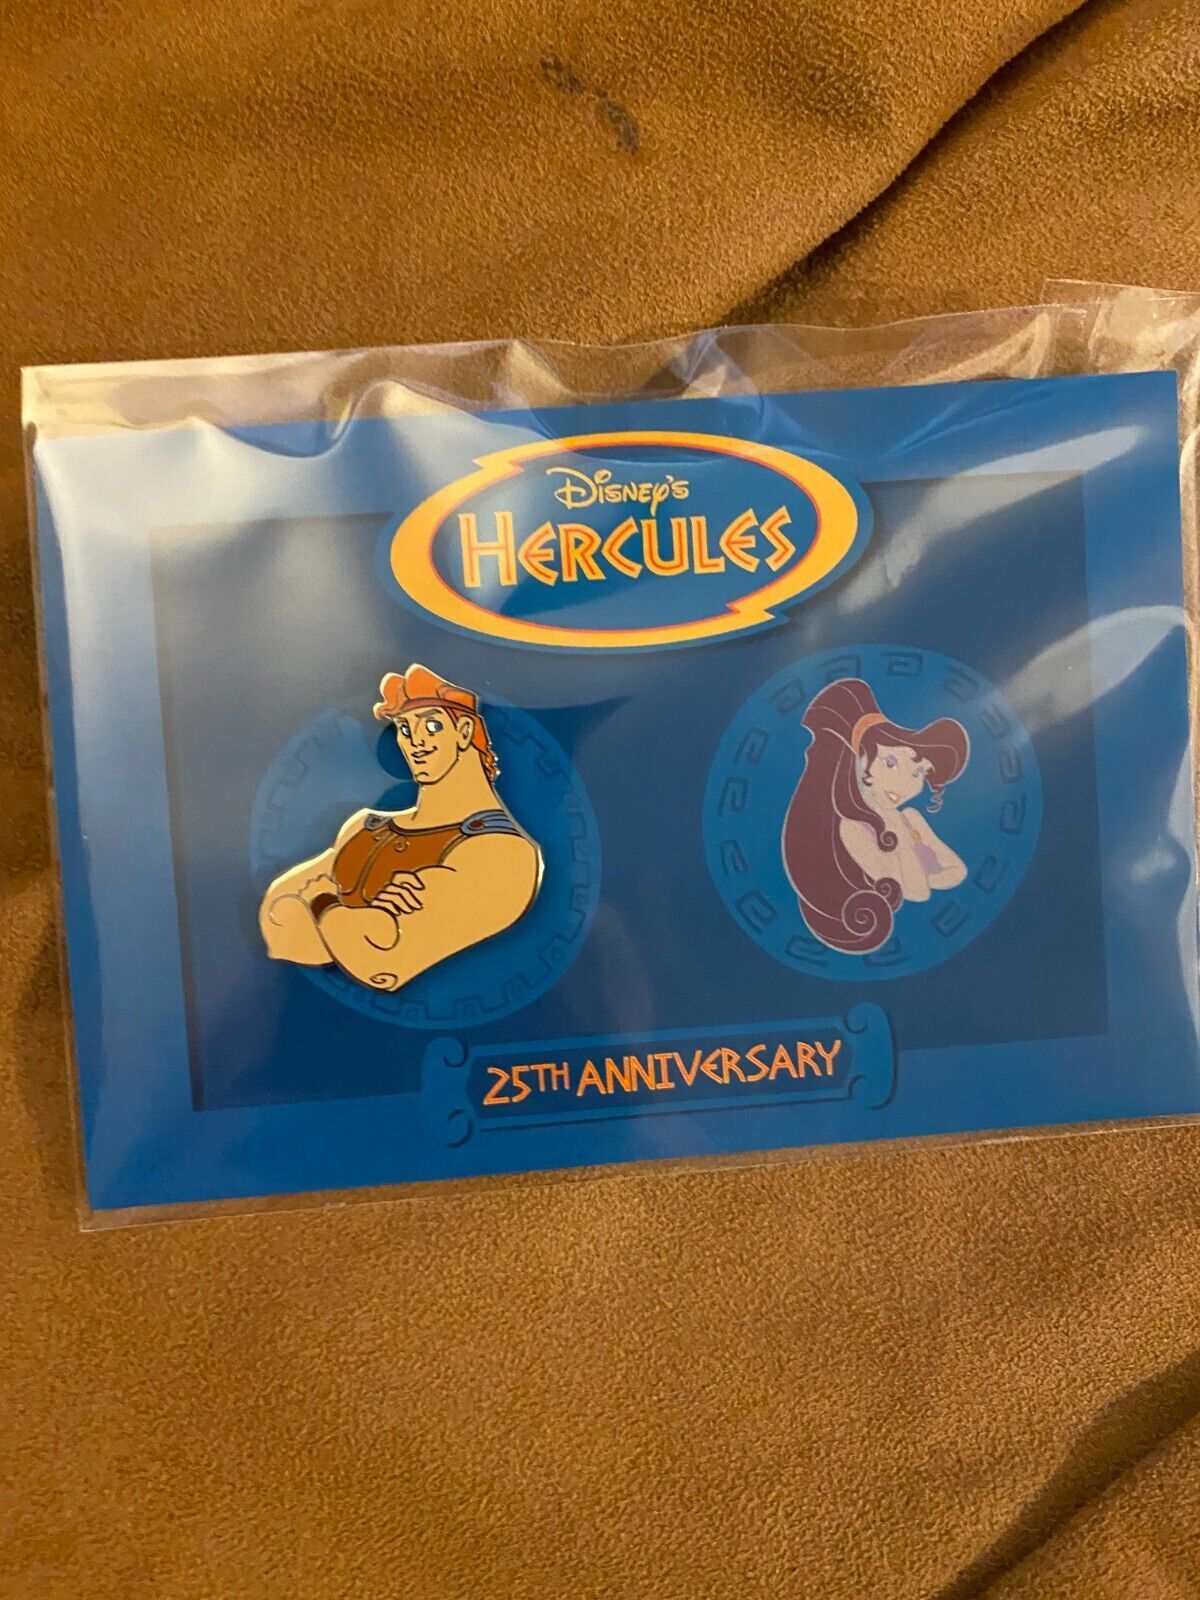 Primary image for D23 2022 Movie Insider Hercules Pin (1 Pin) Expo Exclusive LE New In Package!